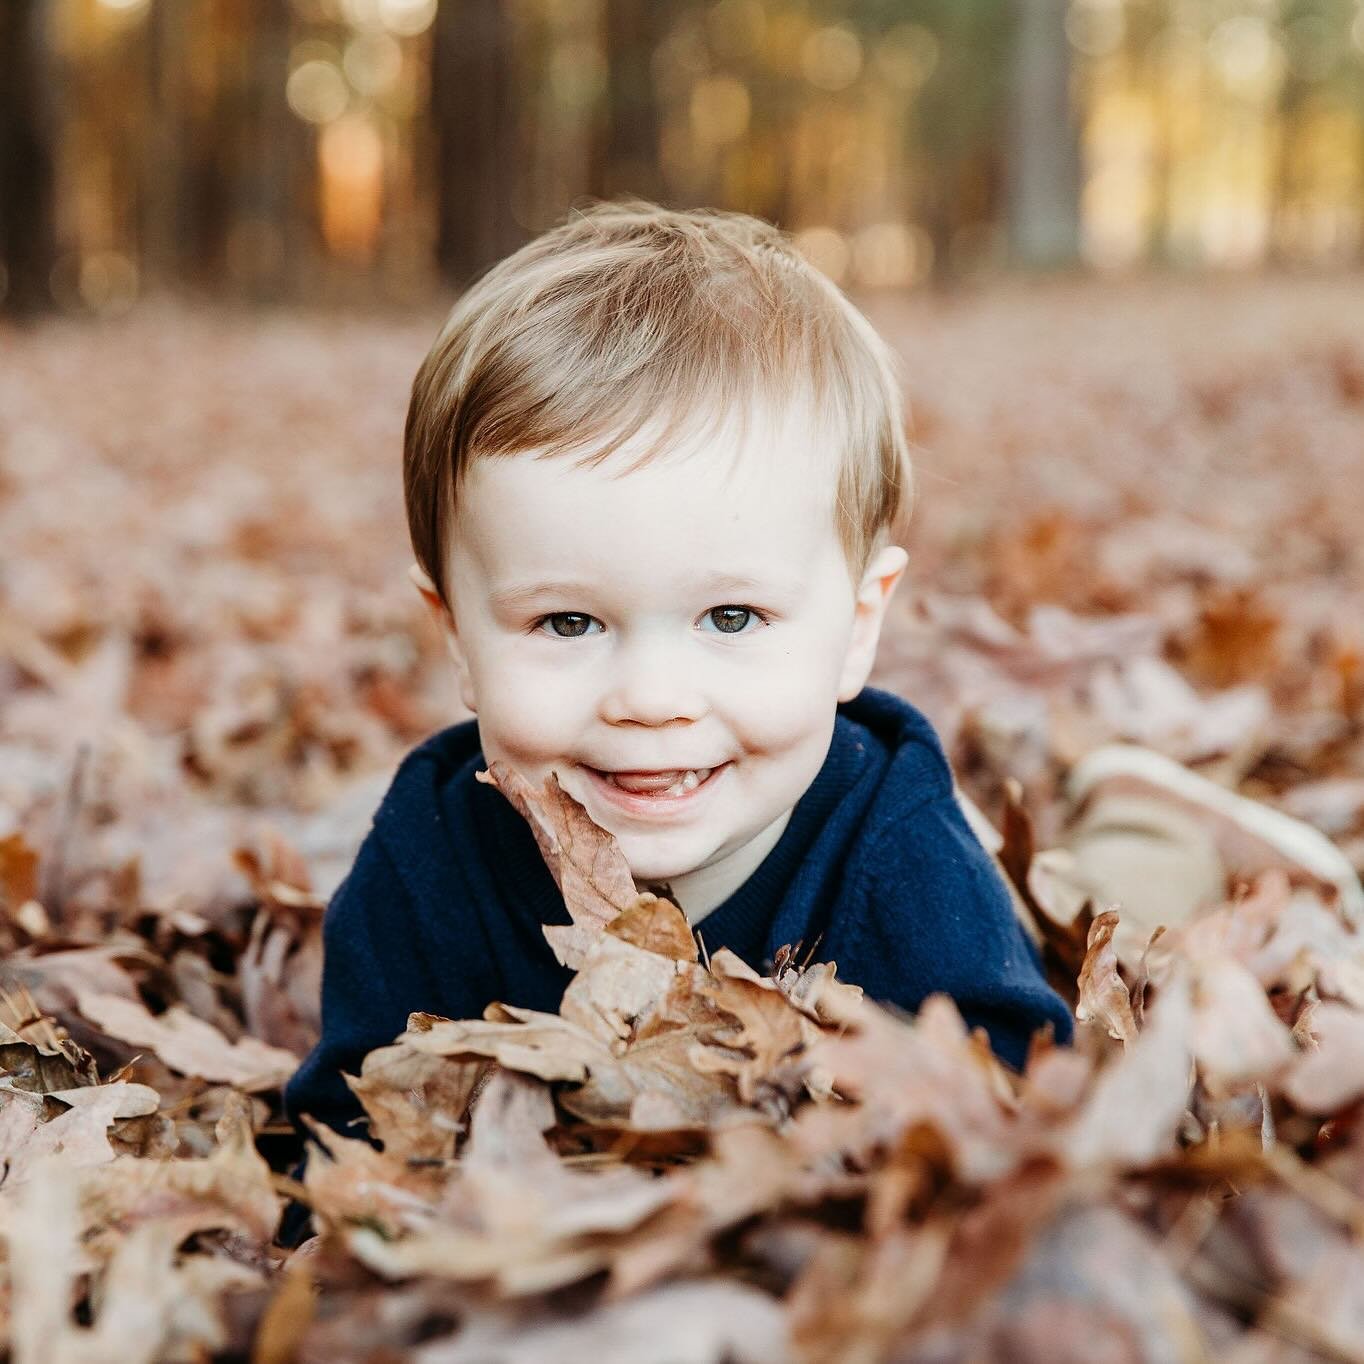 Who doesn&rsquo;t love a cute kiddo laying in the leaves?! 😆 🥰
#cartersvillephotographer #kennesawphotographer #acworthphotographer